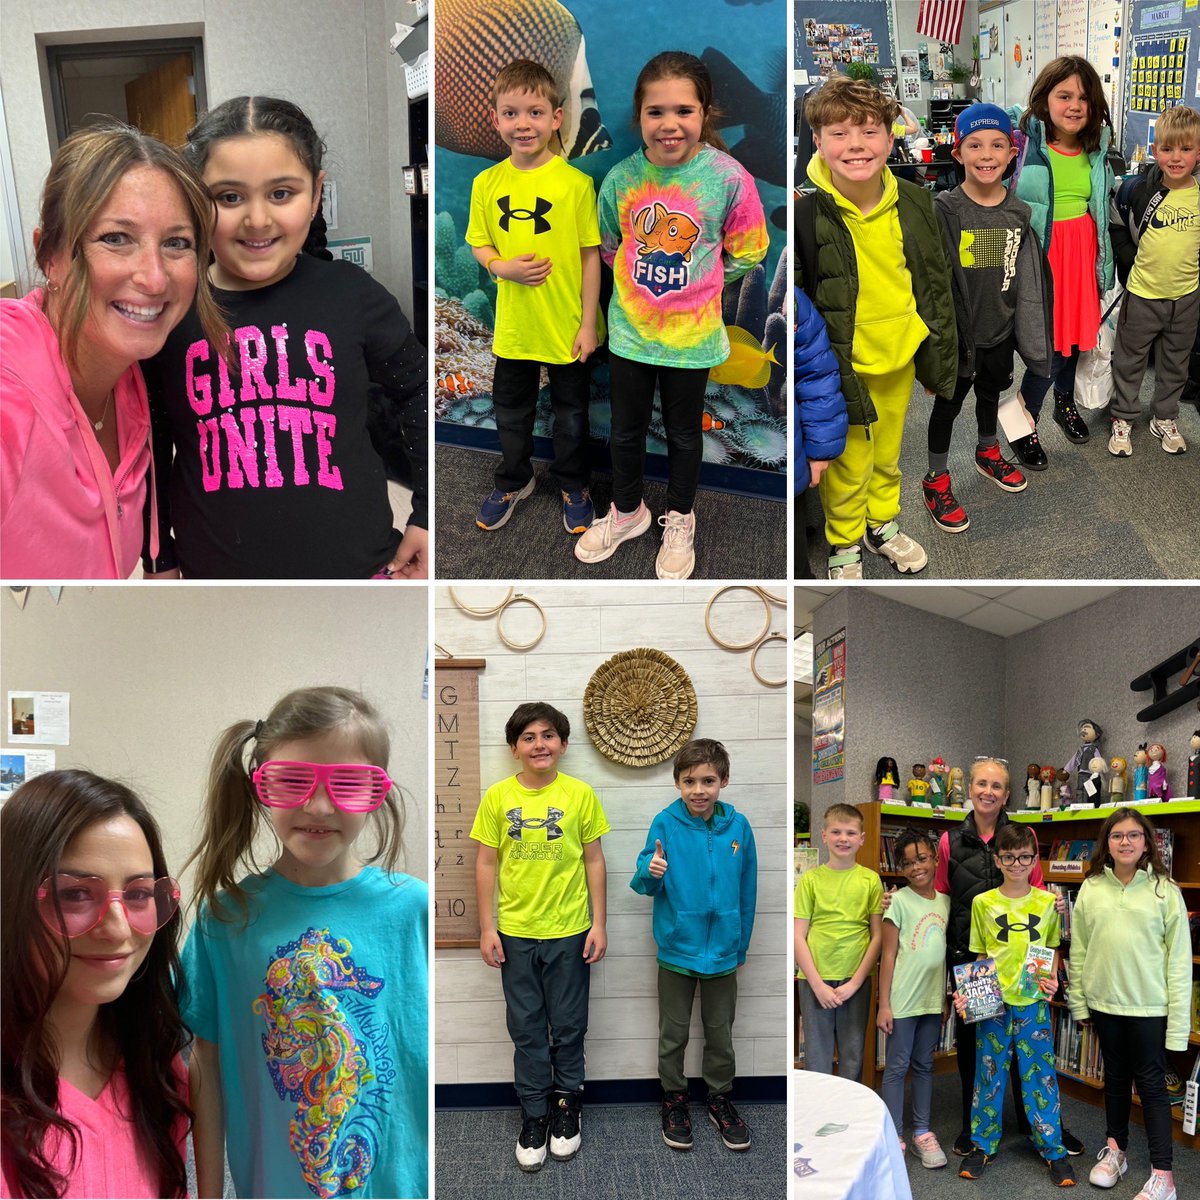 Our #FCEfish are shining BRIGHT and looking forward to Spring Break! 😎 Loved the School Spirit by wearing neon colors today @FCEhse. 💚 #YES